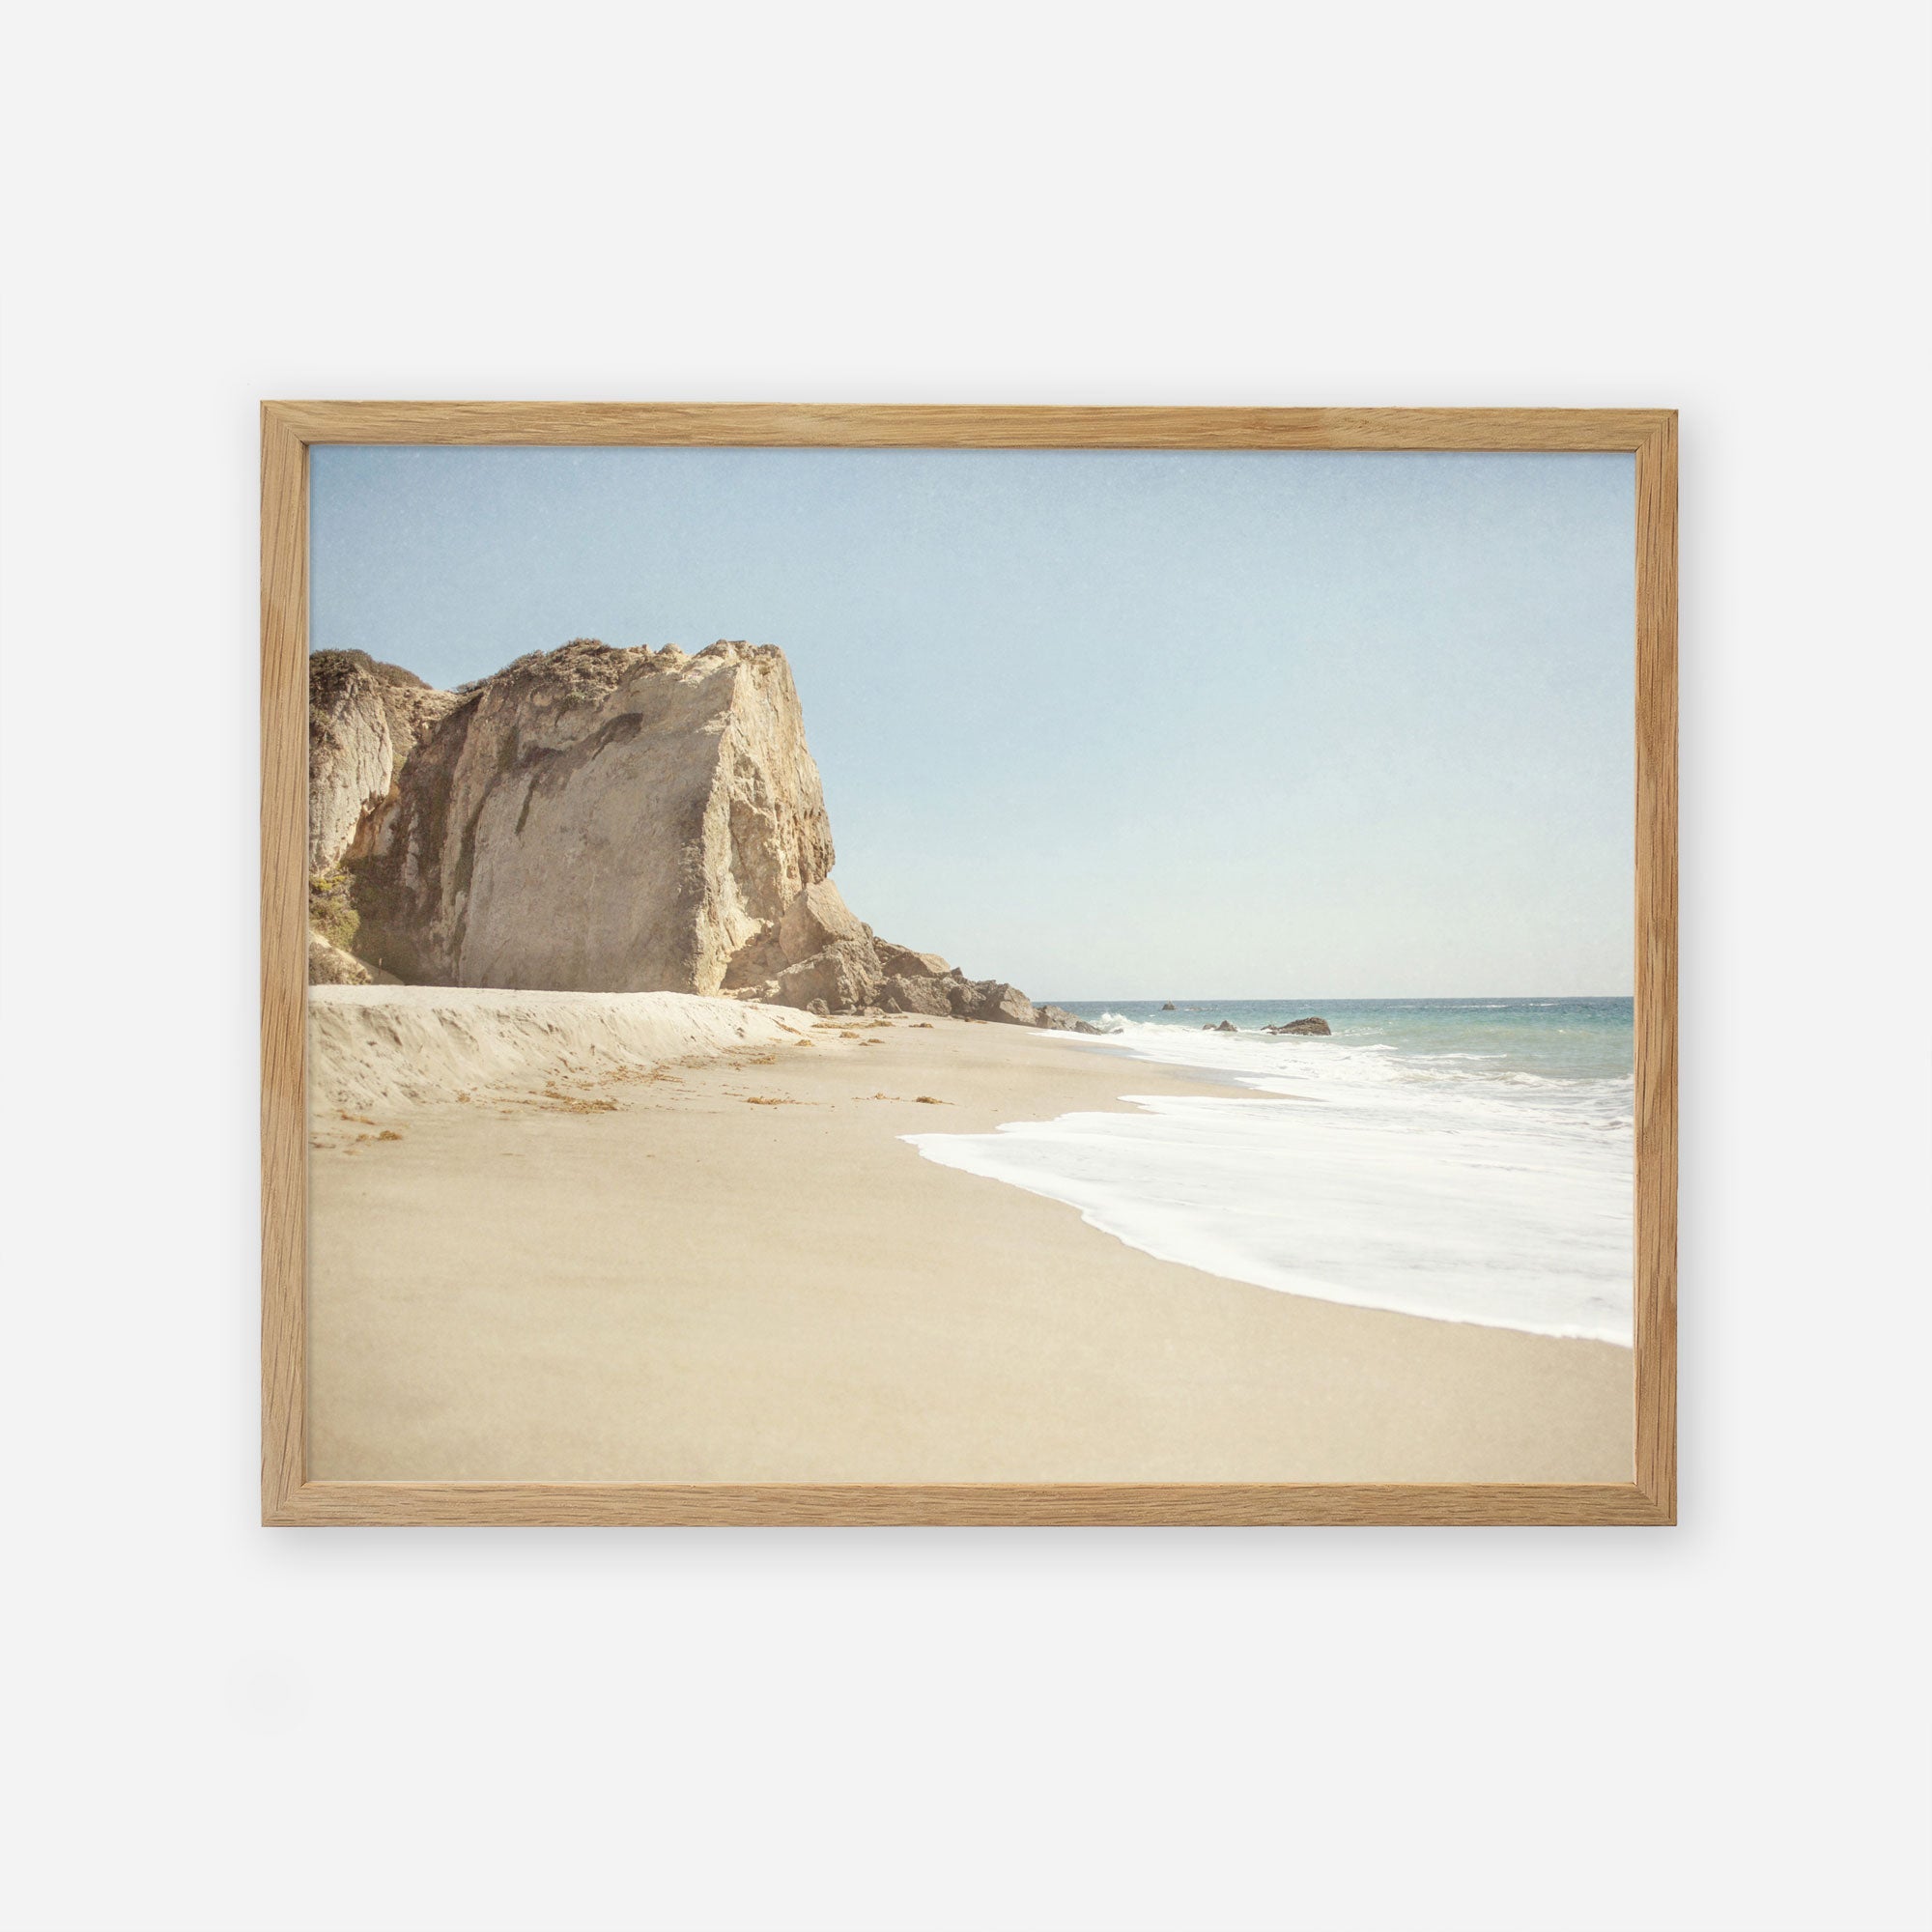 A framed painting of a serene beach scene at Point Dume, with a large cliff on the left, white sand, and gentle waves under a clear sky by Offley Green&#39;s California Malibu Print, &#39;Point Dume&#39;.